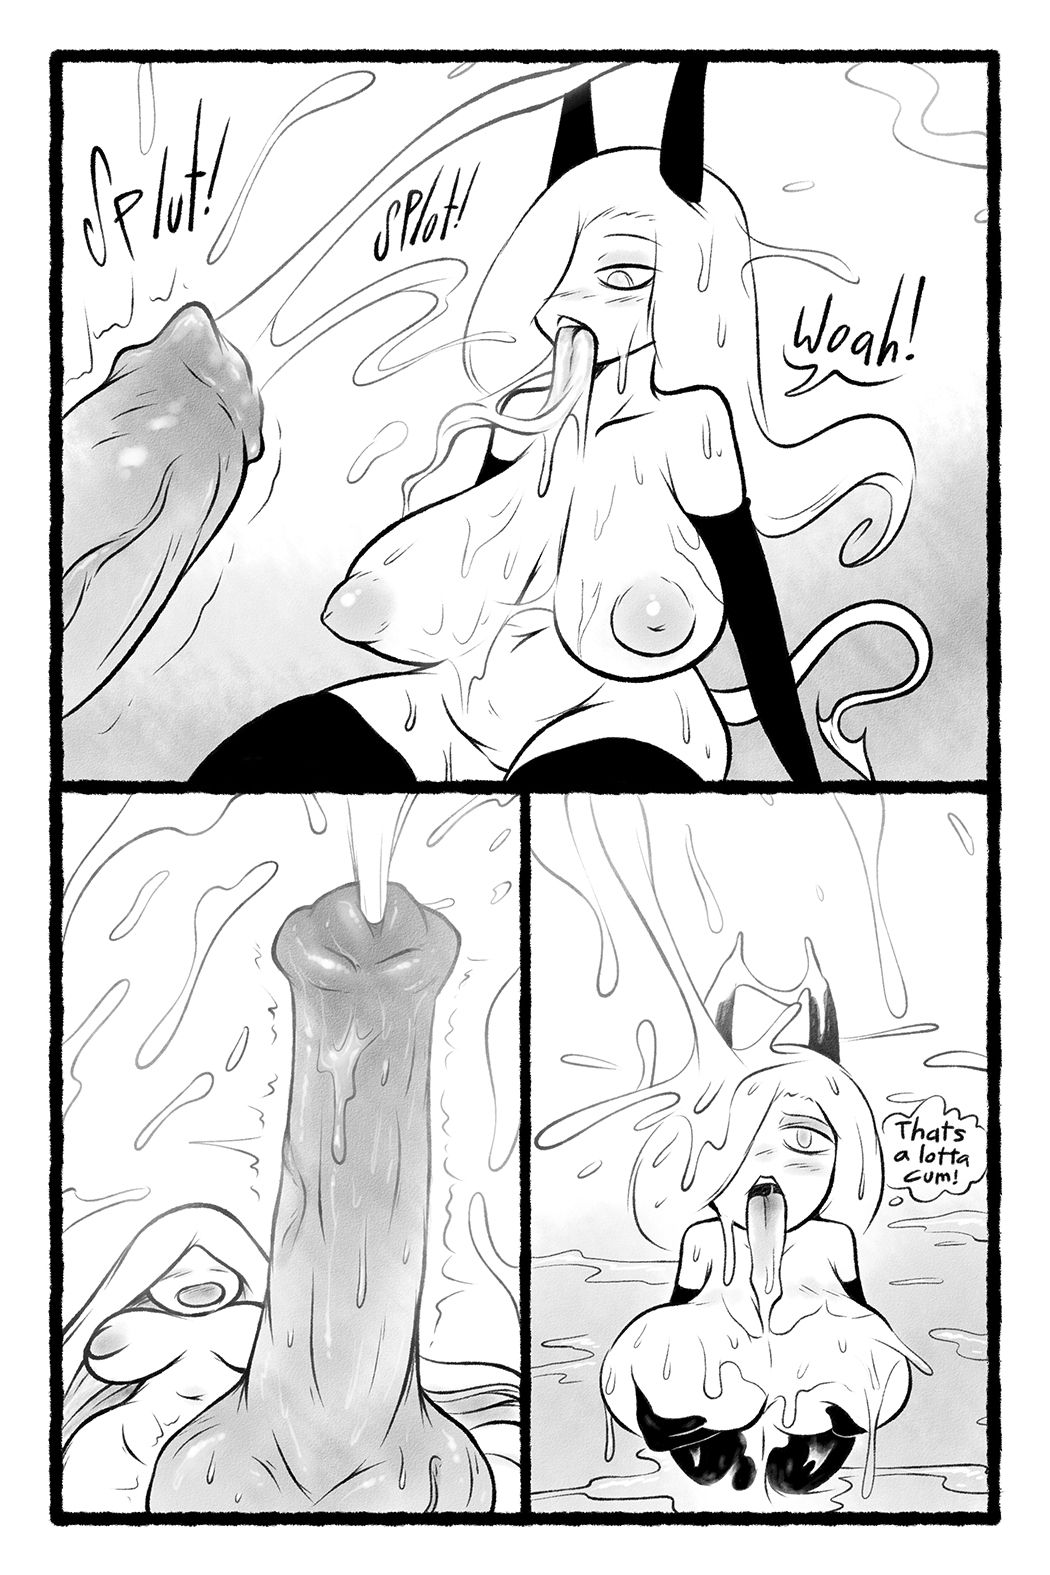 [CheezyWEAPON] Horny Hell Hoes Origins 72